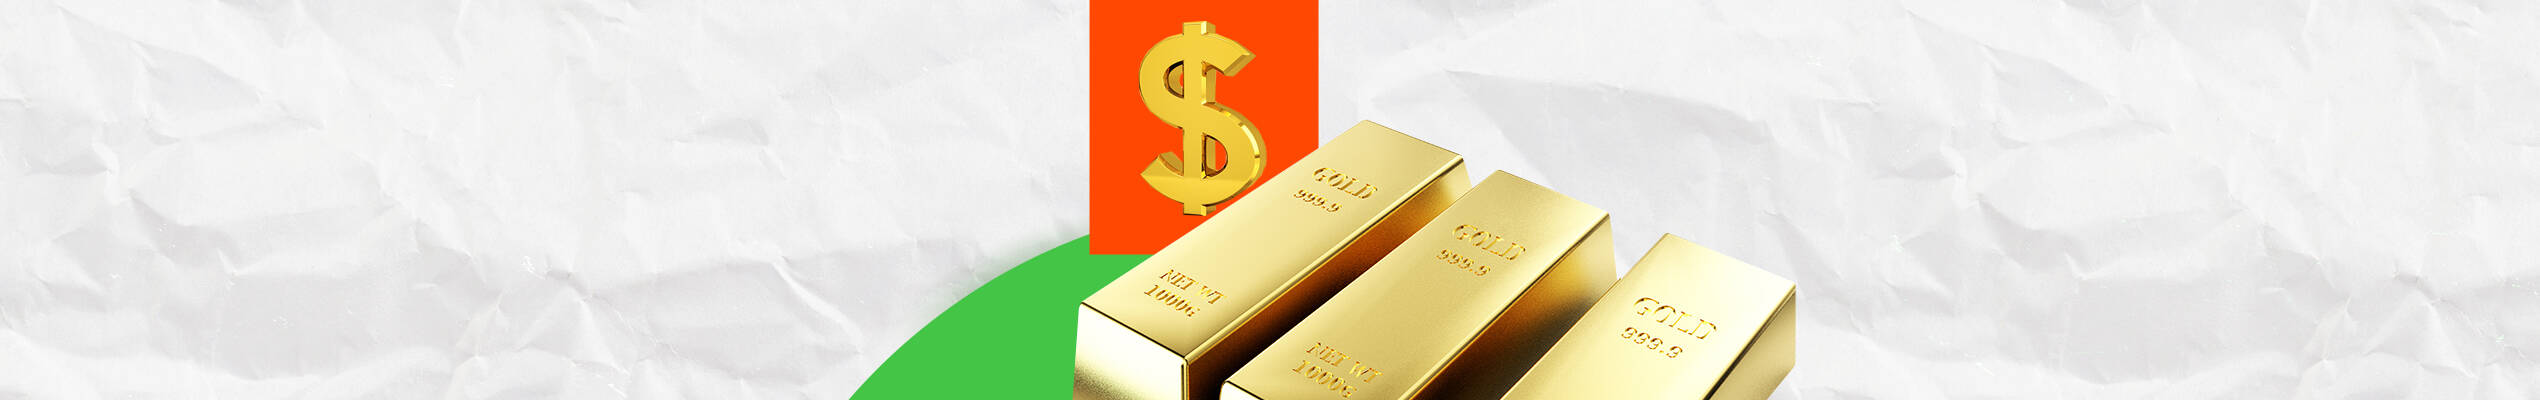 Gold: two steps forward, one step back